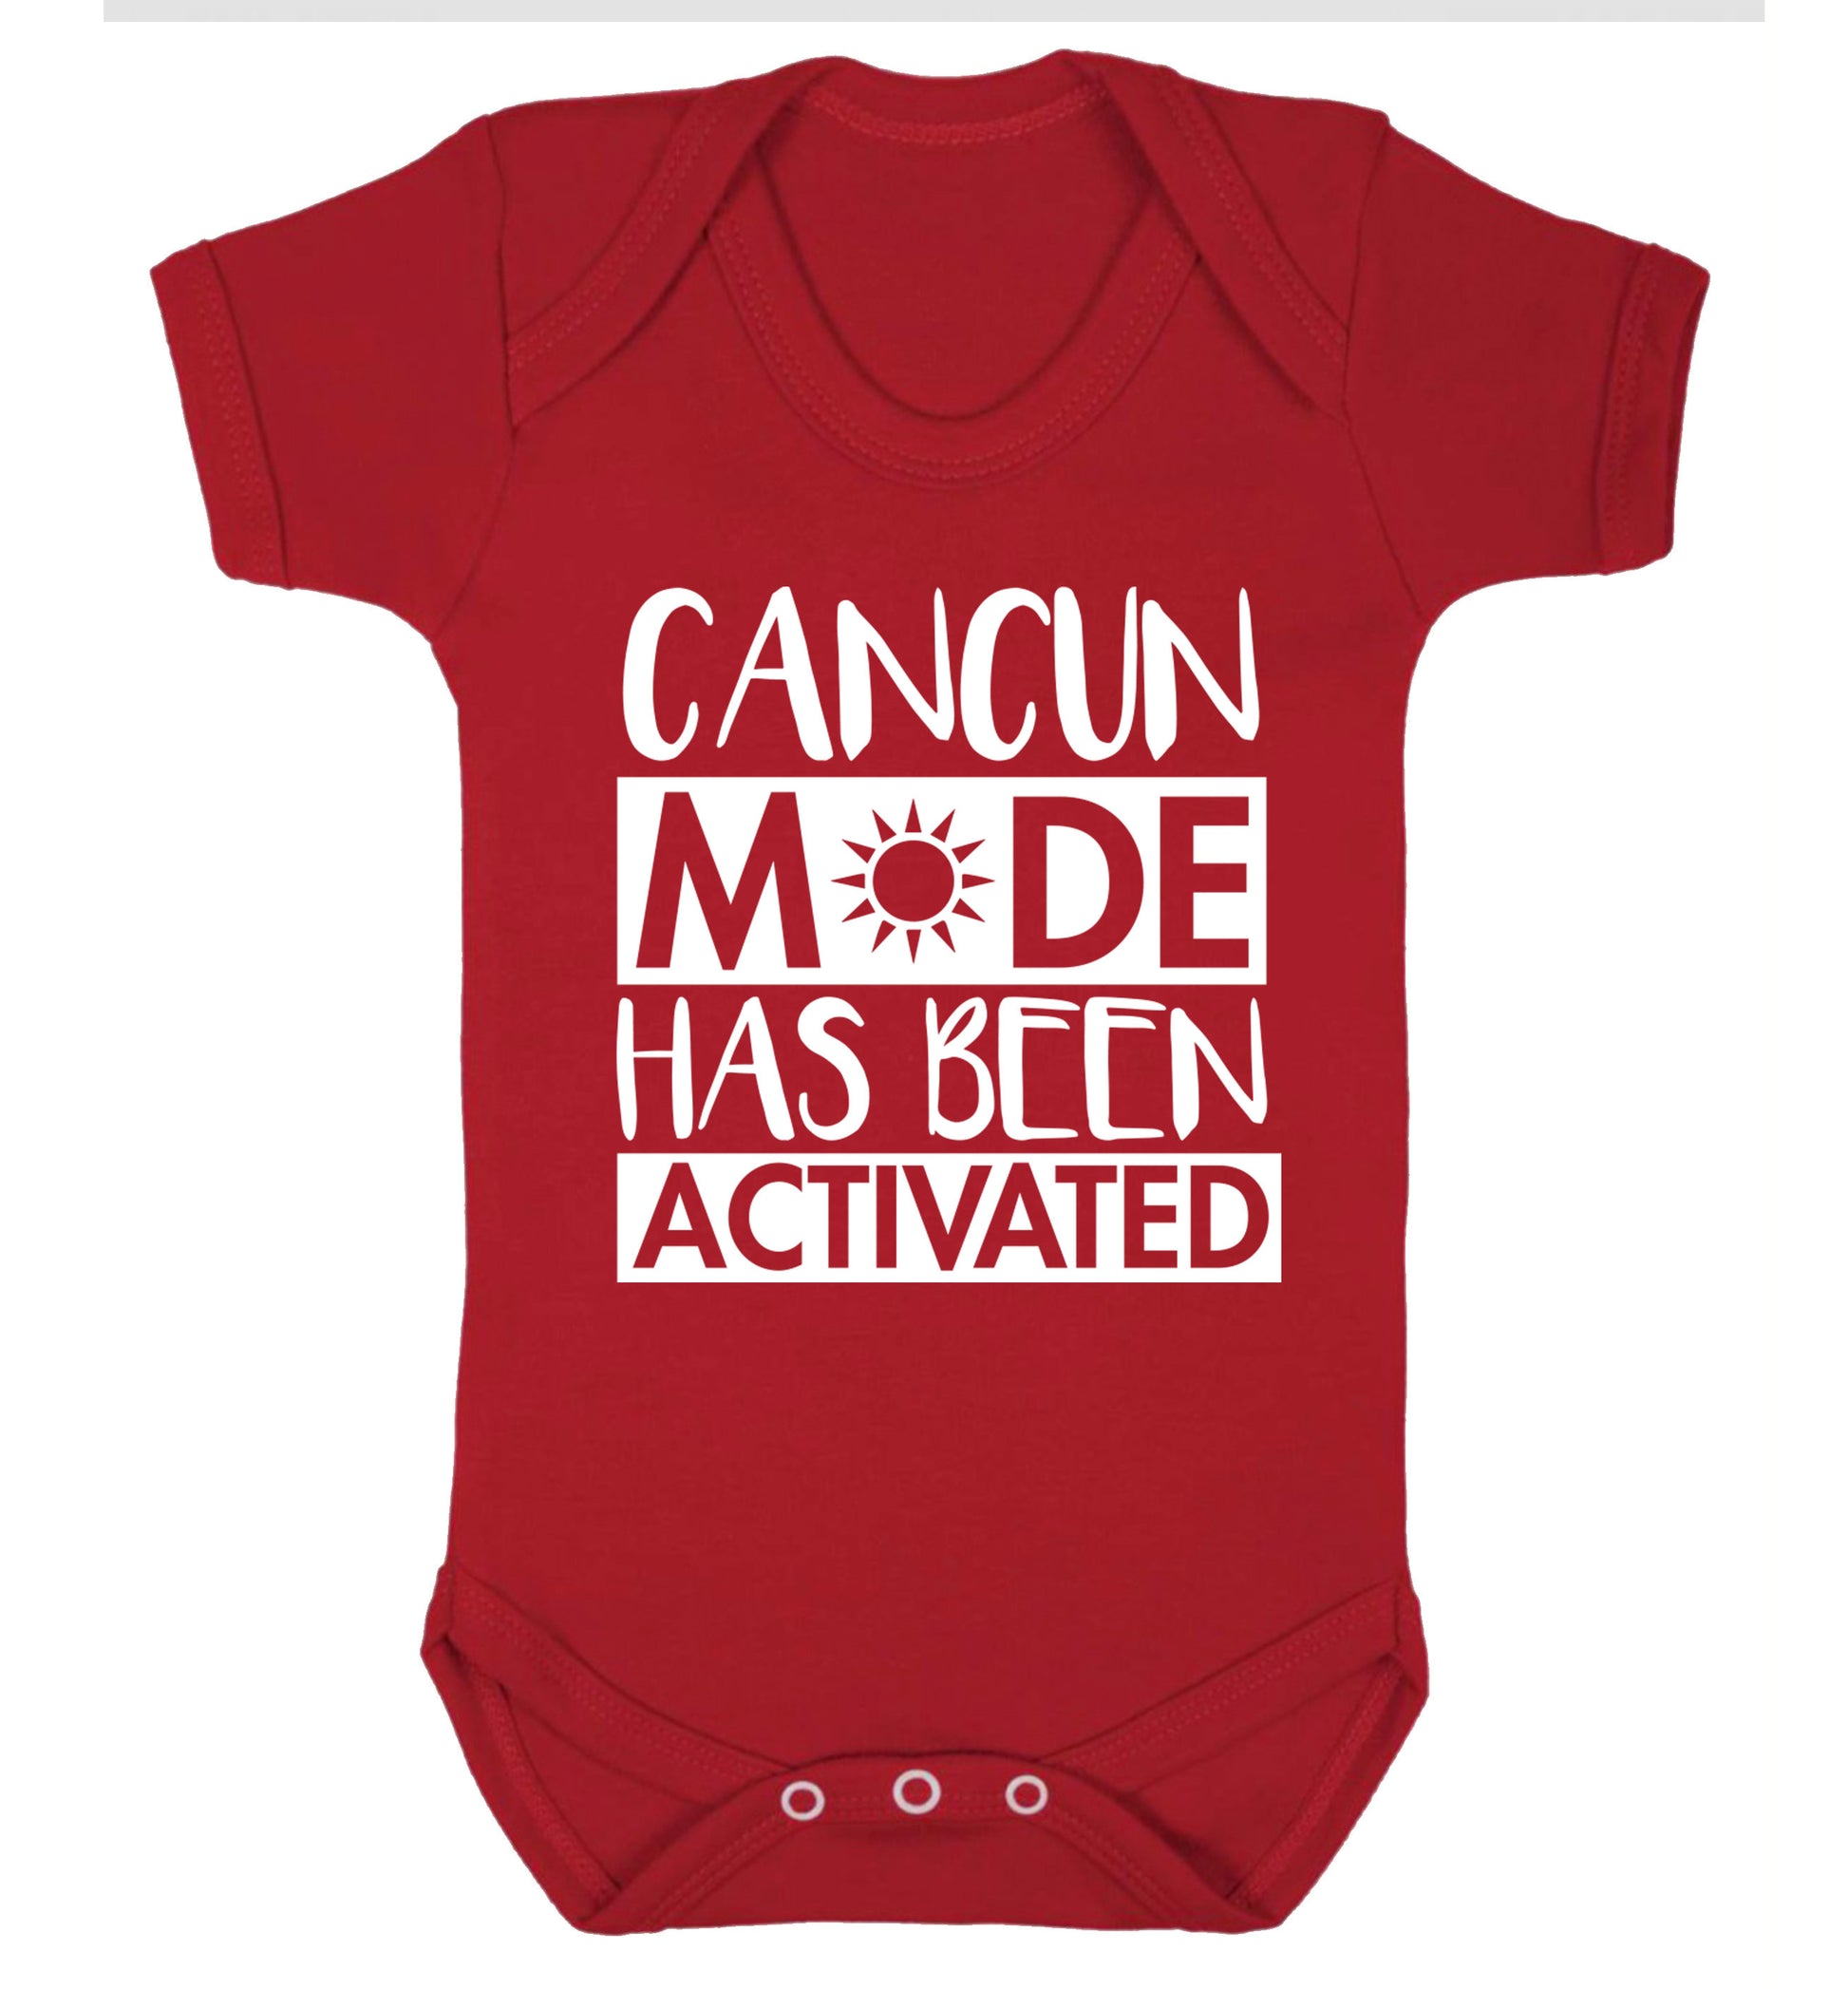 Cancun mode has been activated Baby Vest red 18-24 months